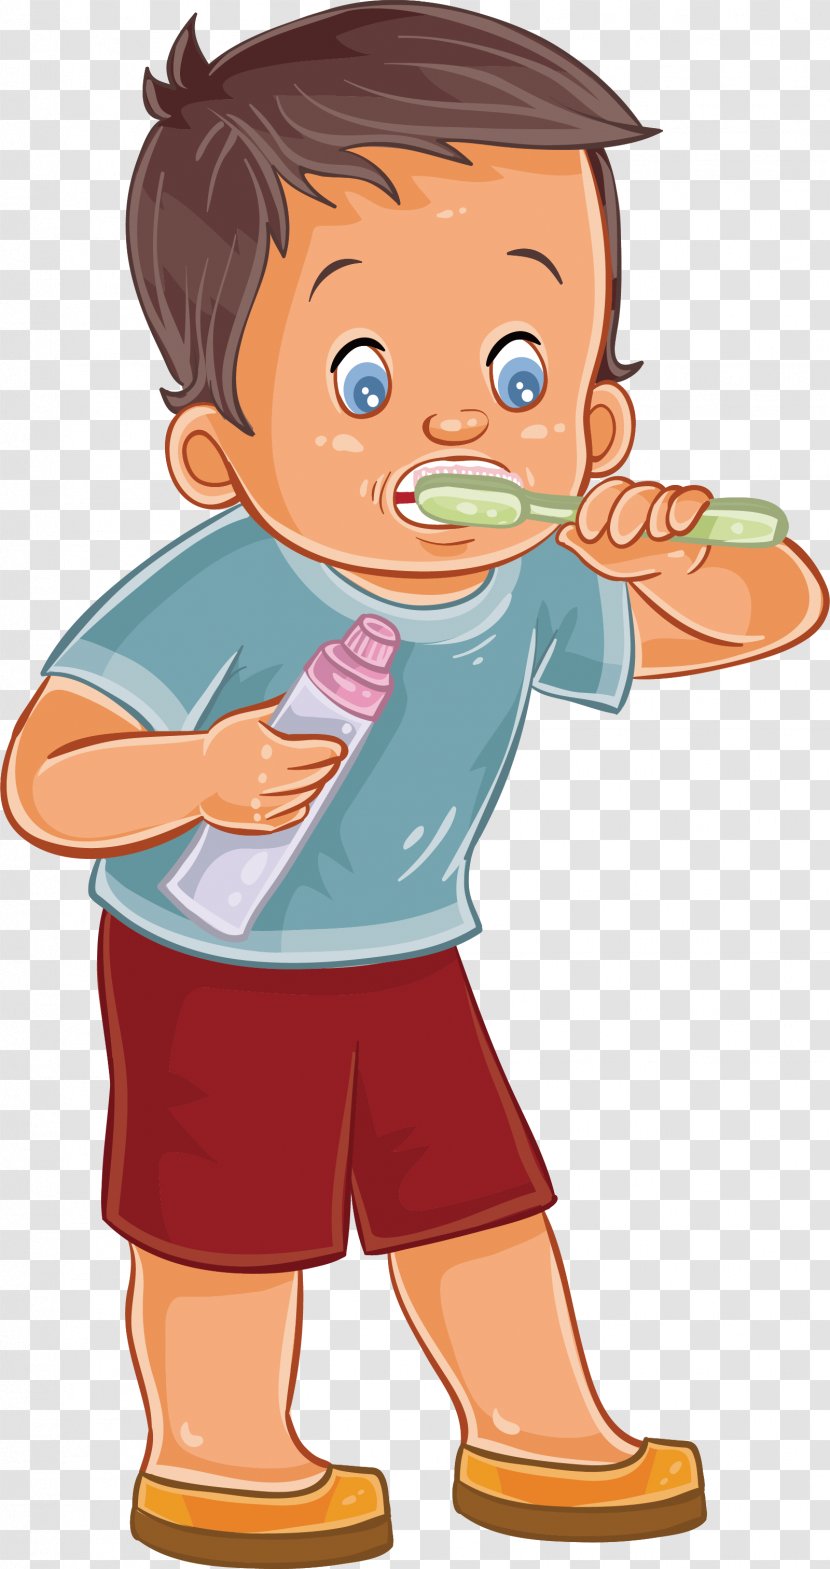 Tooth Brushing Photography Royalty-free Illustration - Silhouette - The Boy Who Brush His Teeth By Himself Transparent PNG